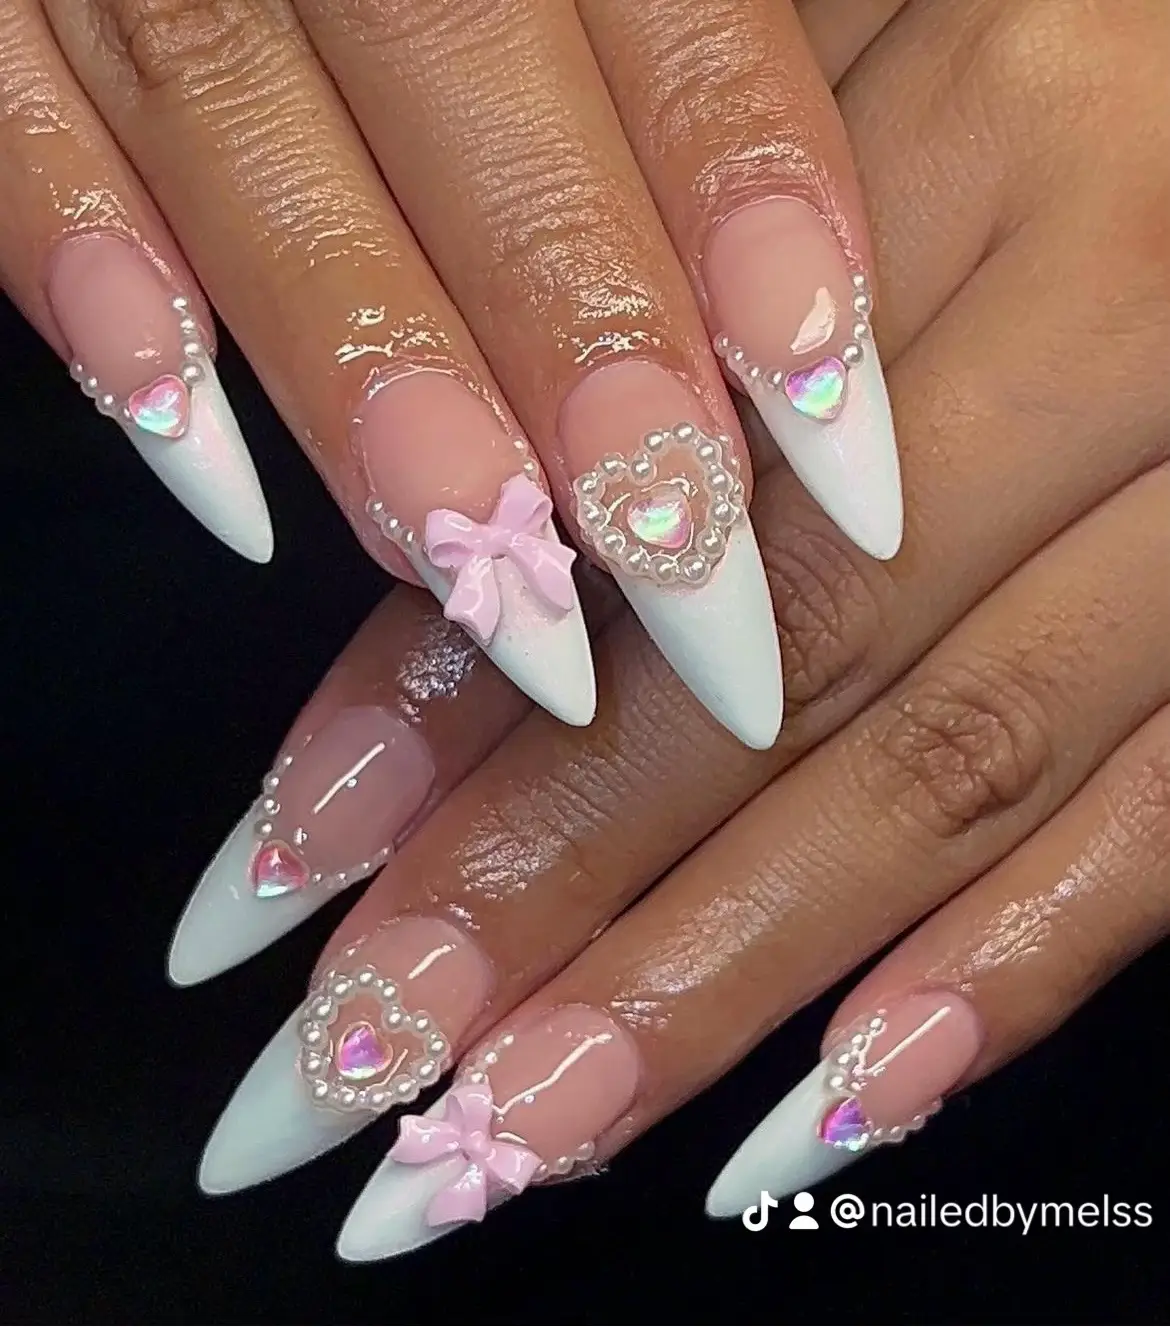 coquette nail inspo 🤍🎀🪞, Gallery posted by k